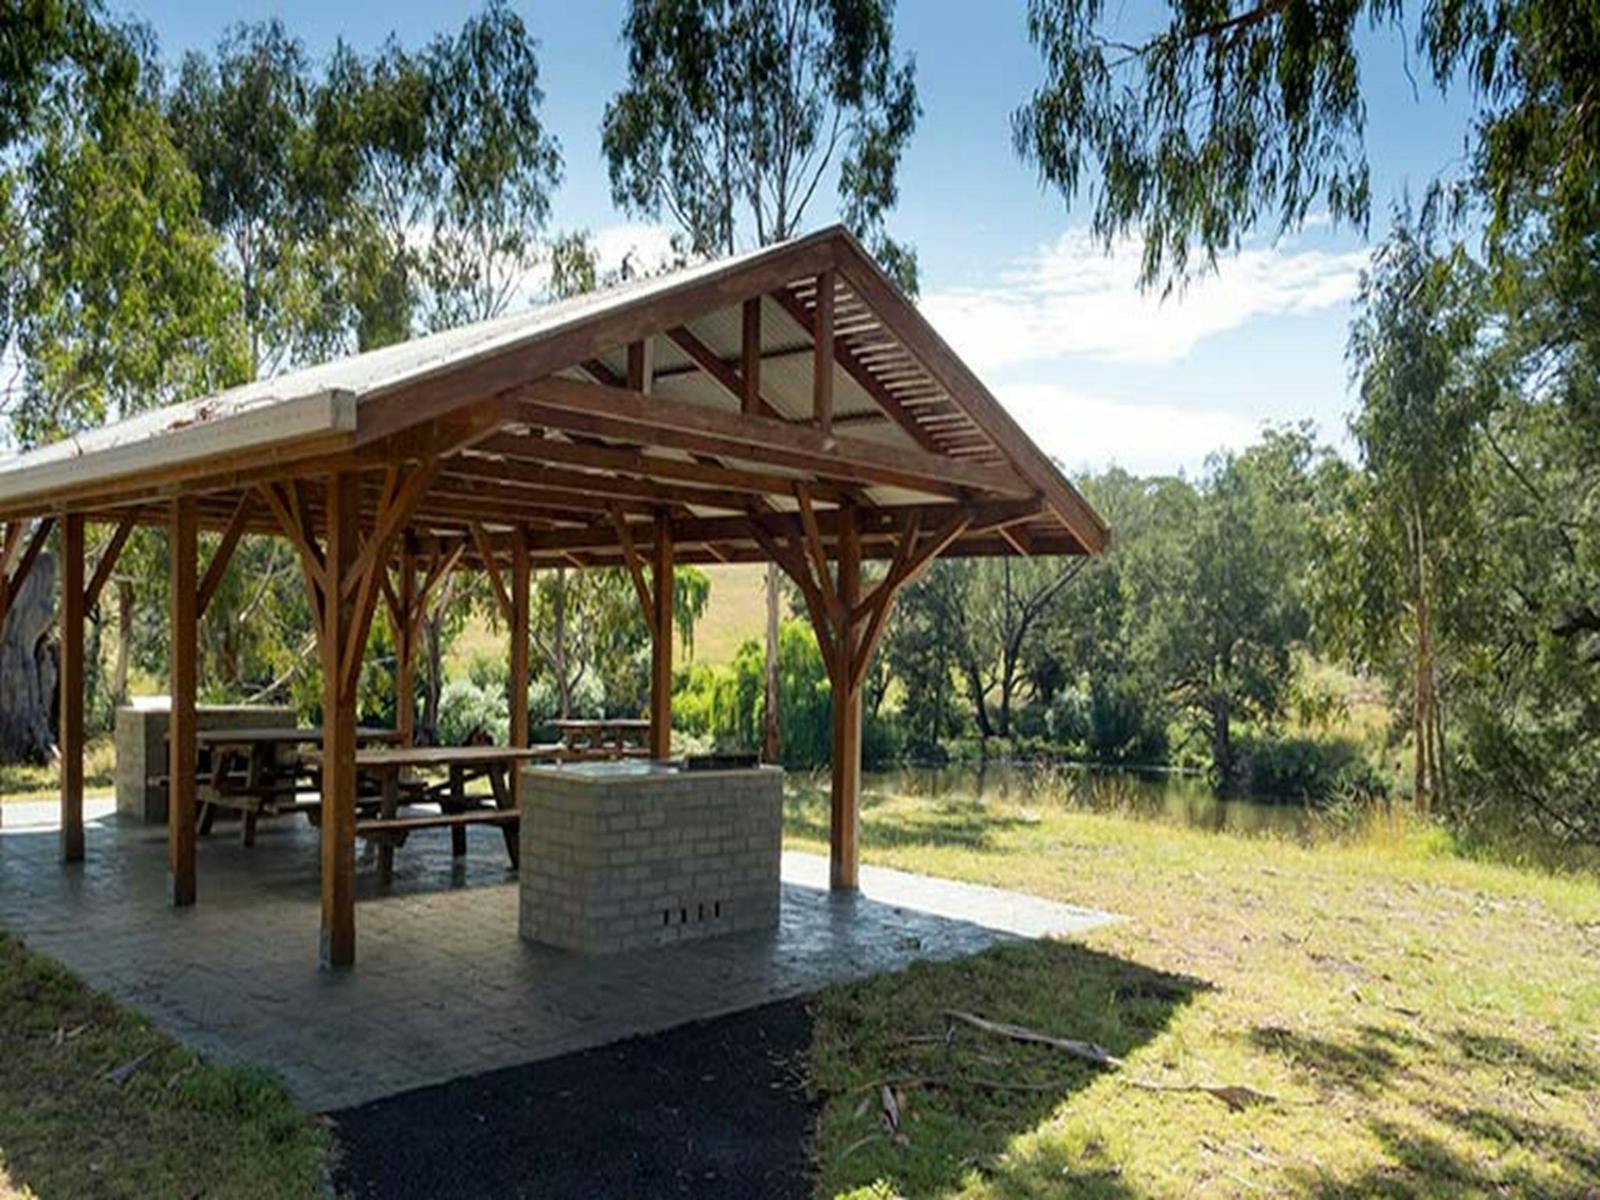 Sheltered barbecue area at Blue Hole picnic area. Photo: Leah Pippos © DPIE